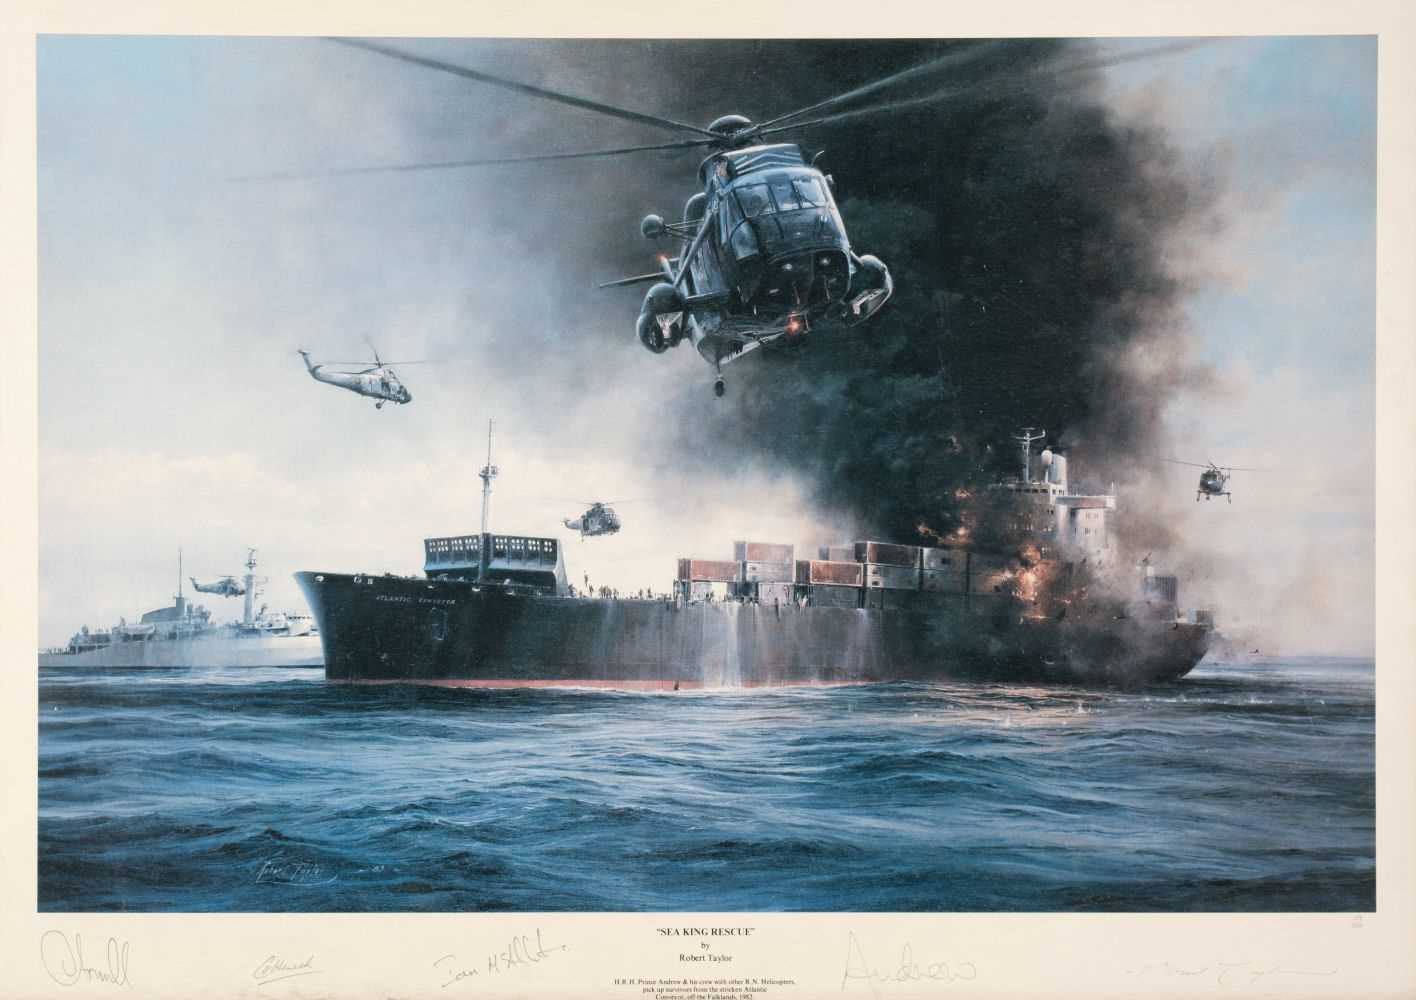 Lot 173 - Aviation Print. "Sea King Rescue" by Robert Taylor